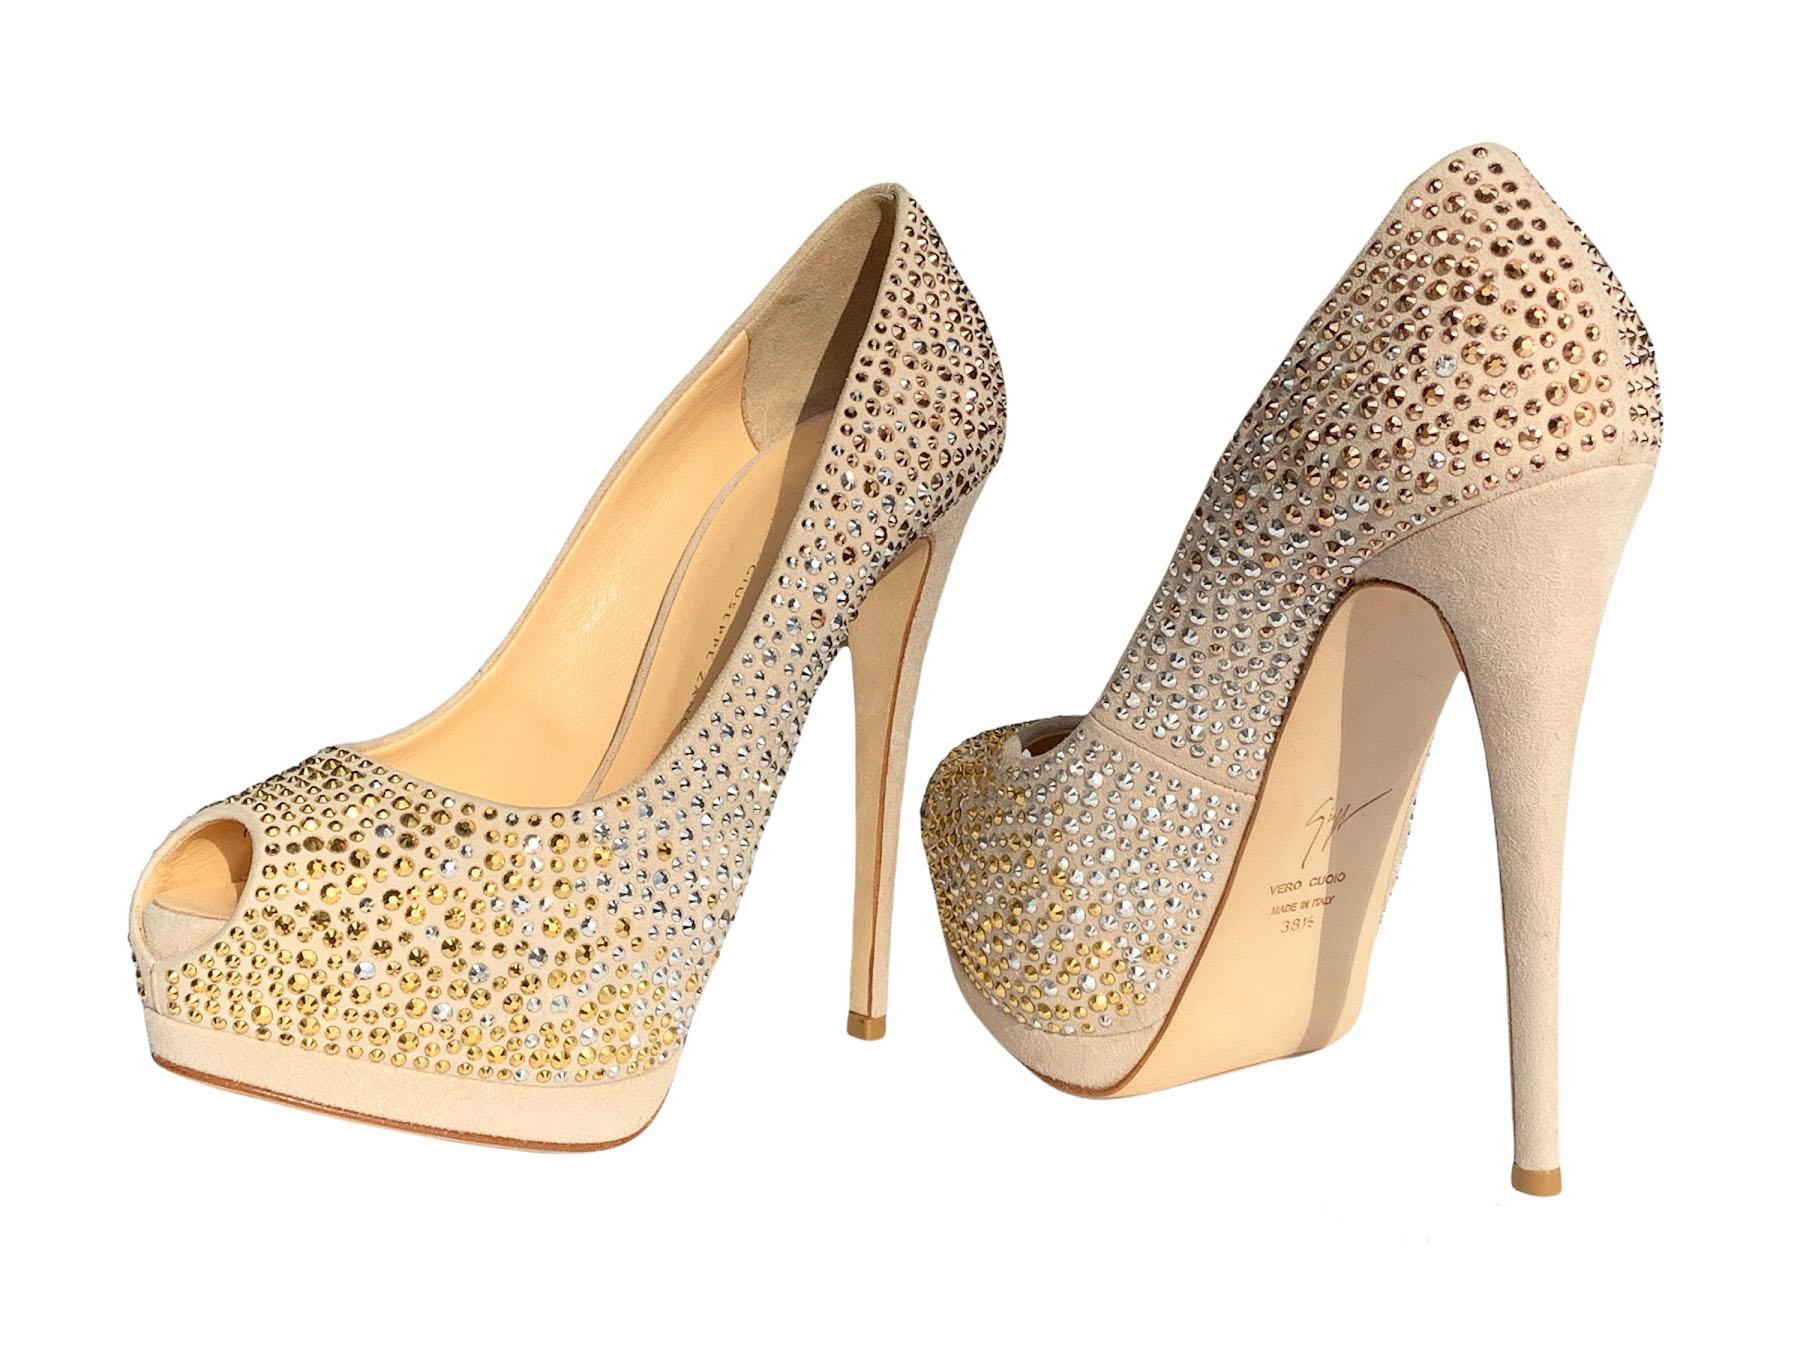 New Giuseppe Zanotti *Sharon* Nude Crystal Beaded Double Platform Heels Pumps
Designer size available - 38 and 38.5
Gold and Silver-tone Crystals over the Nude Color Suede
Heel height - 5.5 inches, Double Platform total - 1.25 inches.
Leather Sole